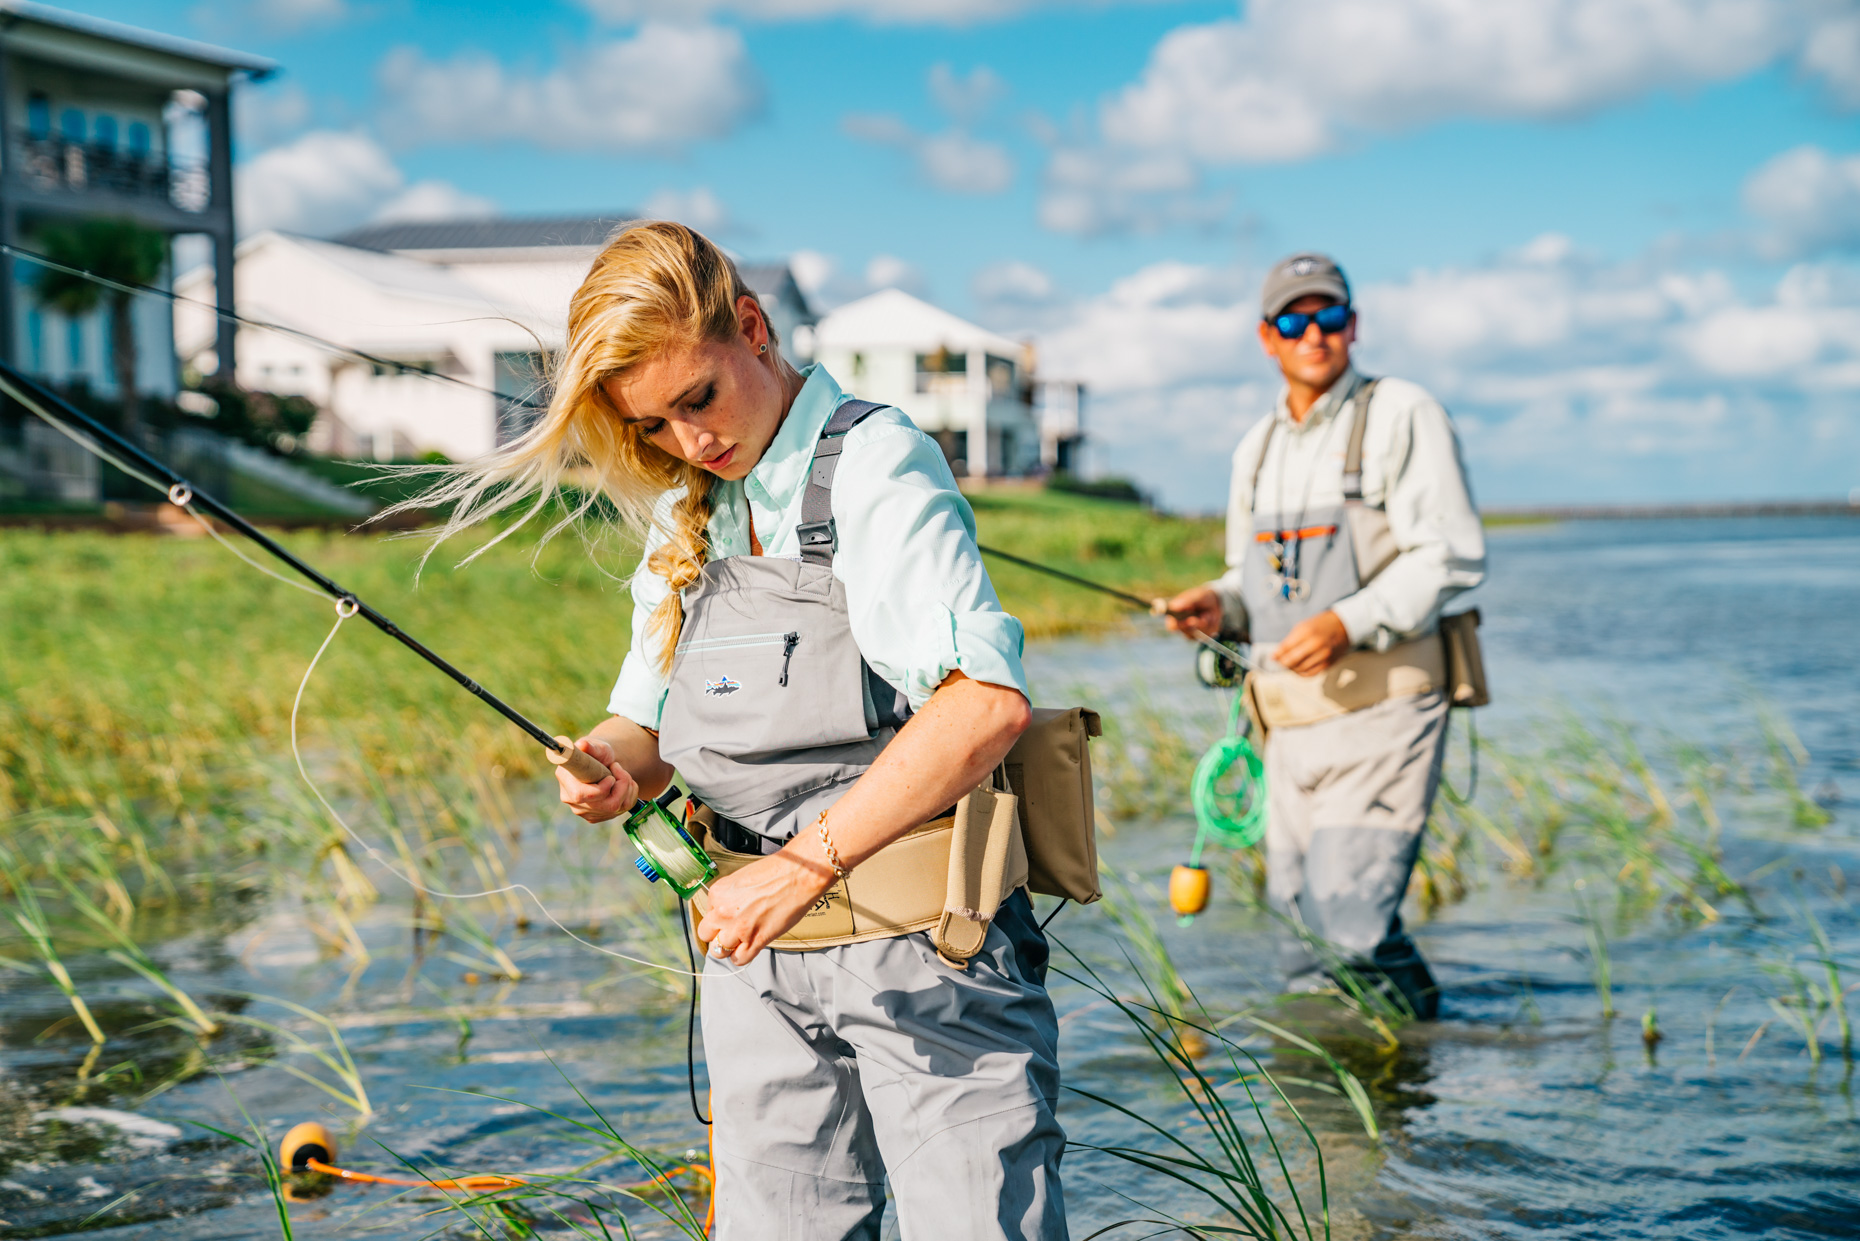 Woman-and-man-in-water-fly-fishing-is20190614_SCB_3040Inti-St-Clair-Austin-TX